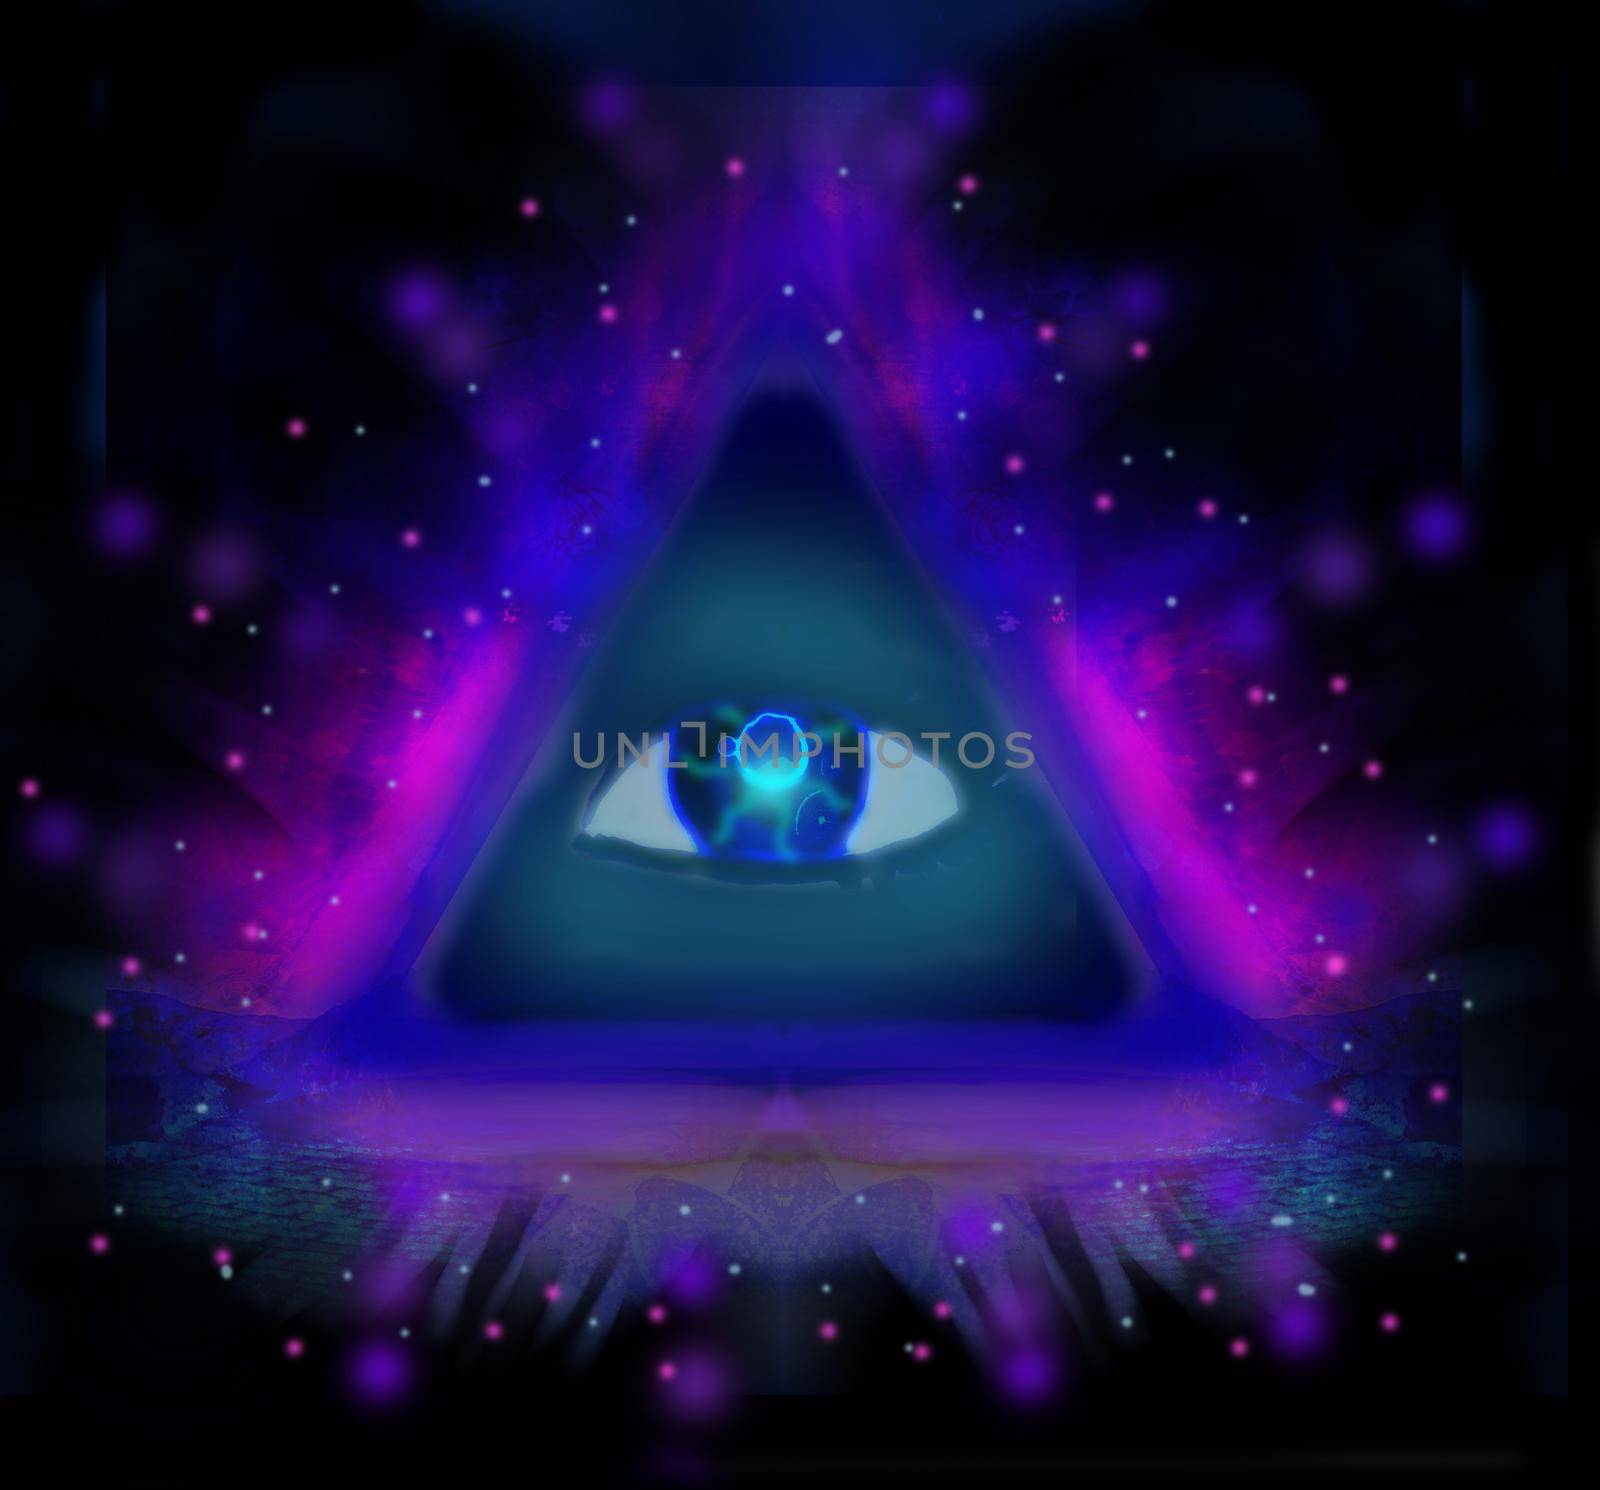 All seeing eye by JackyBrown